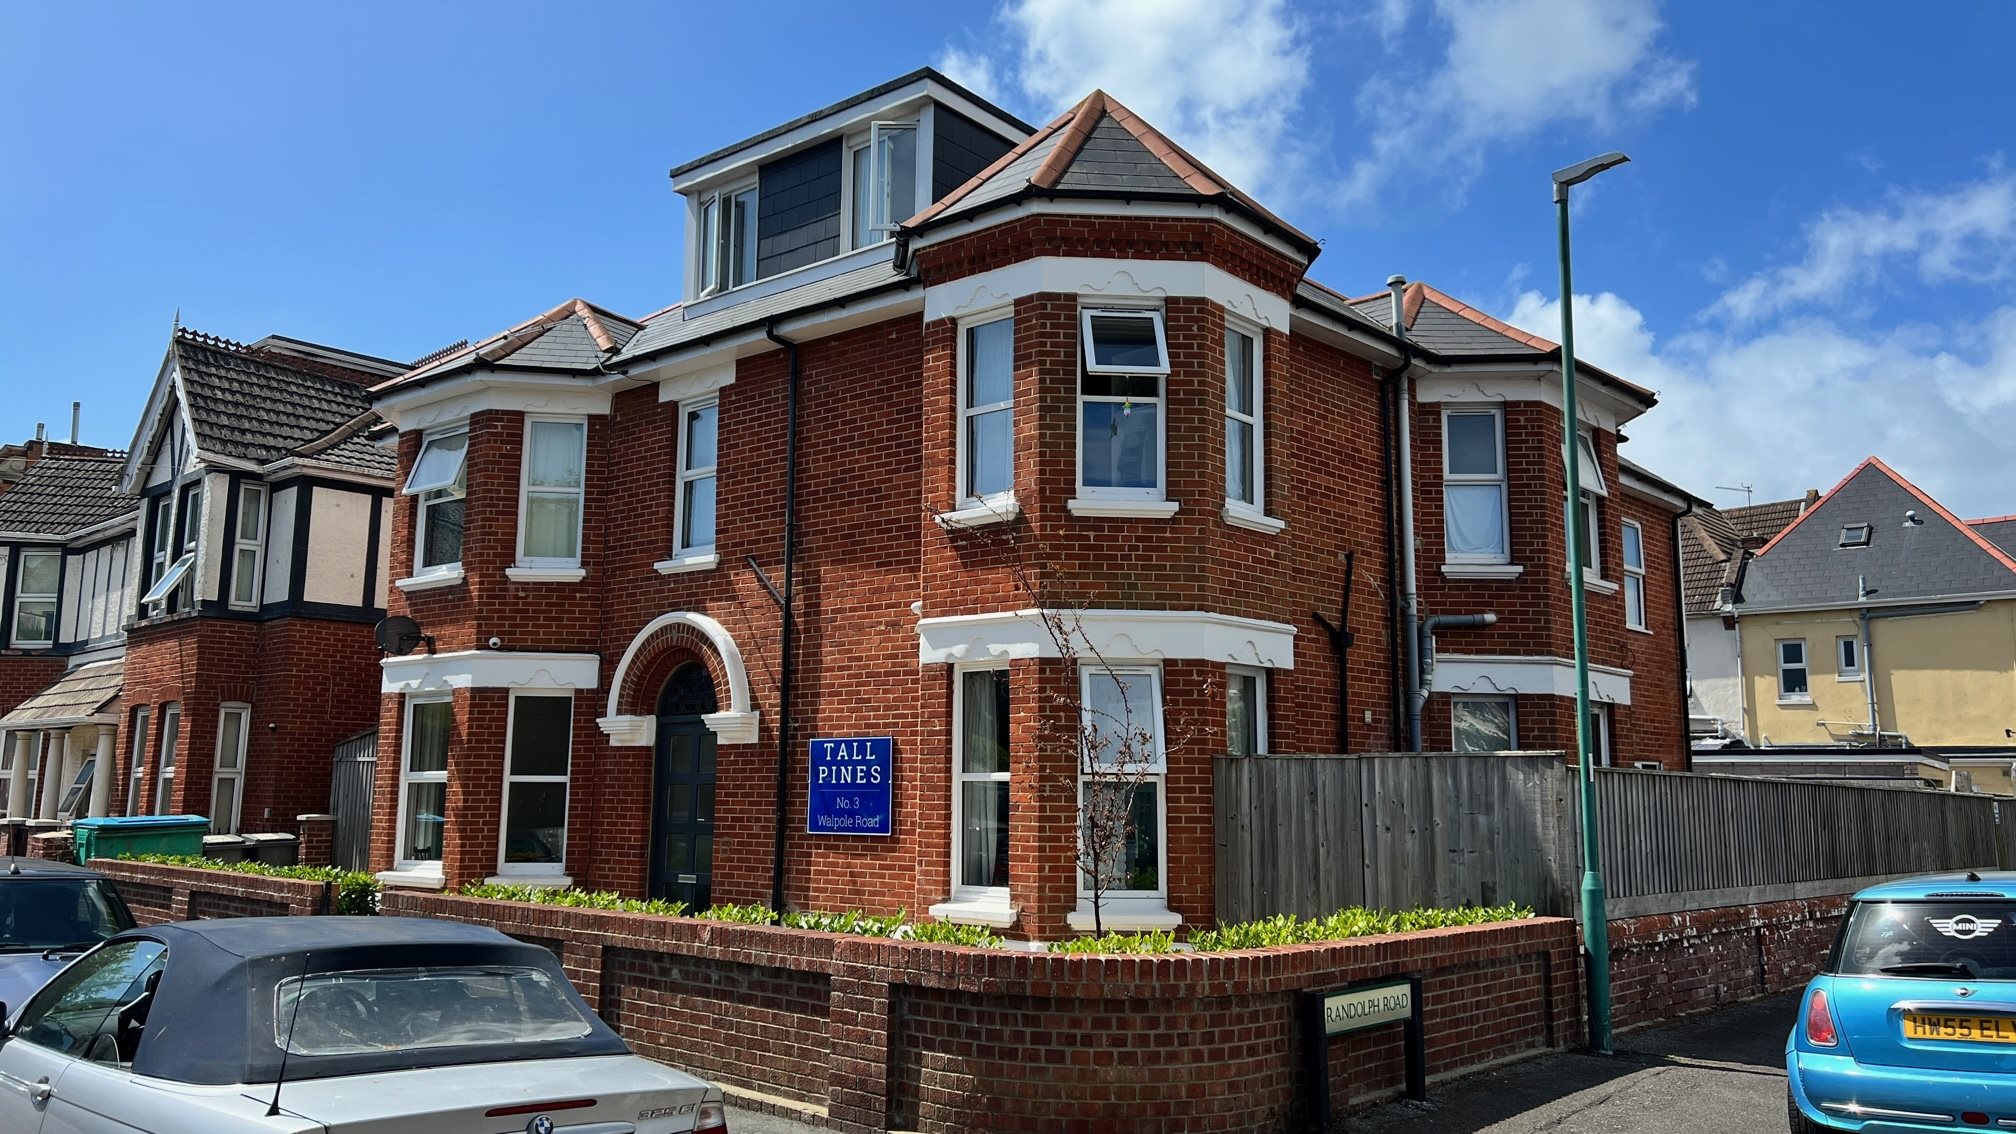 A superb opportunity to purchase a fully licenced Freehold HMO with maximum occupancy for up to 25 people running successfully with an on site House Manager. This attractive ex hotel has been extensively renovated by the current owner who has vast experience in the building trade and maintains the building to a very good standard.